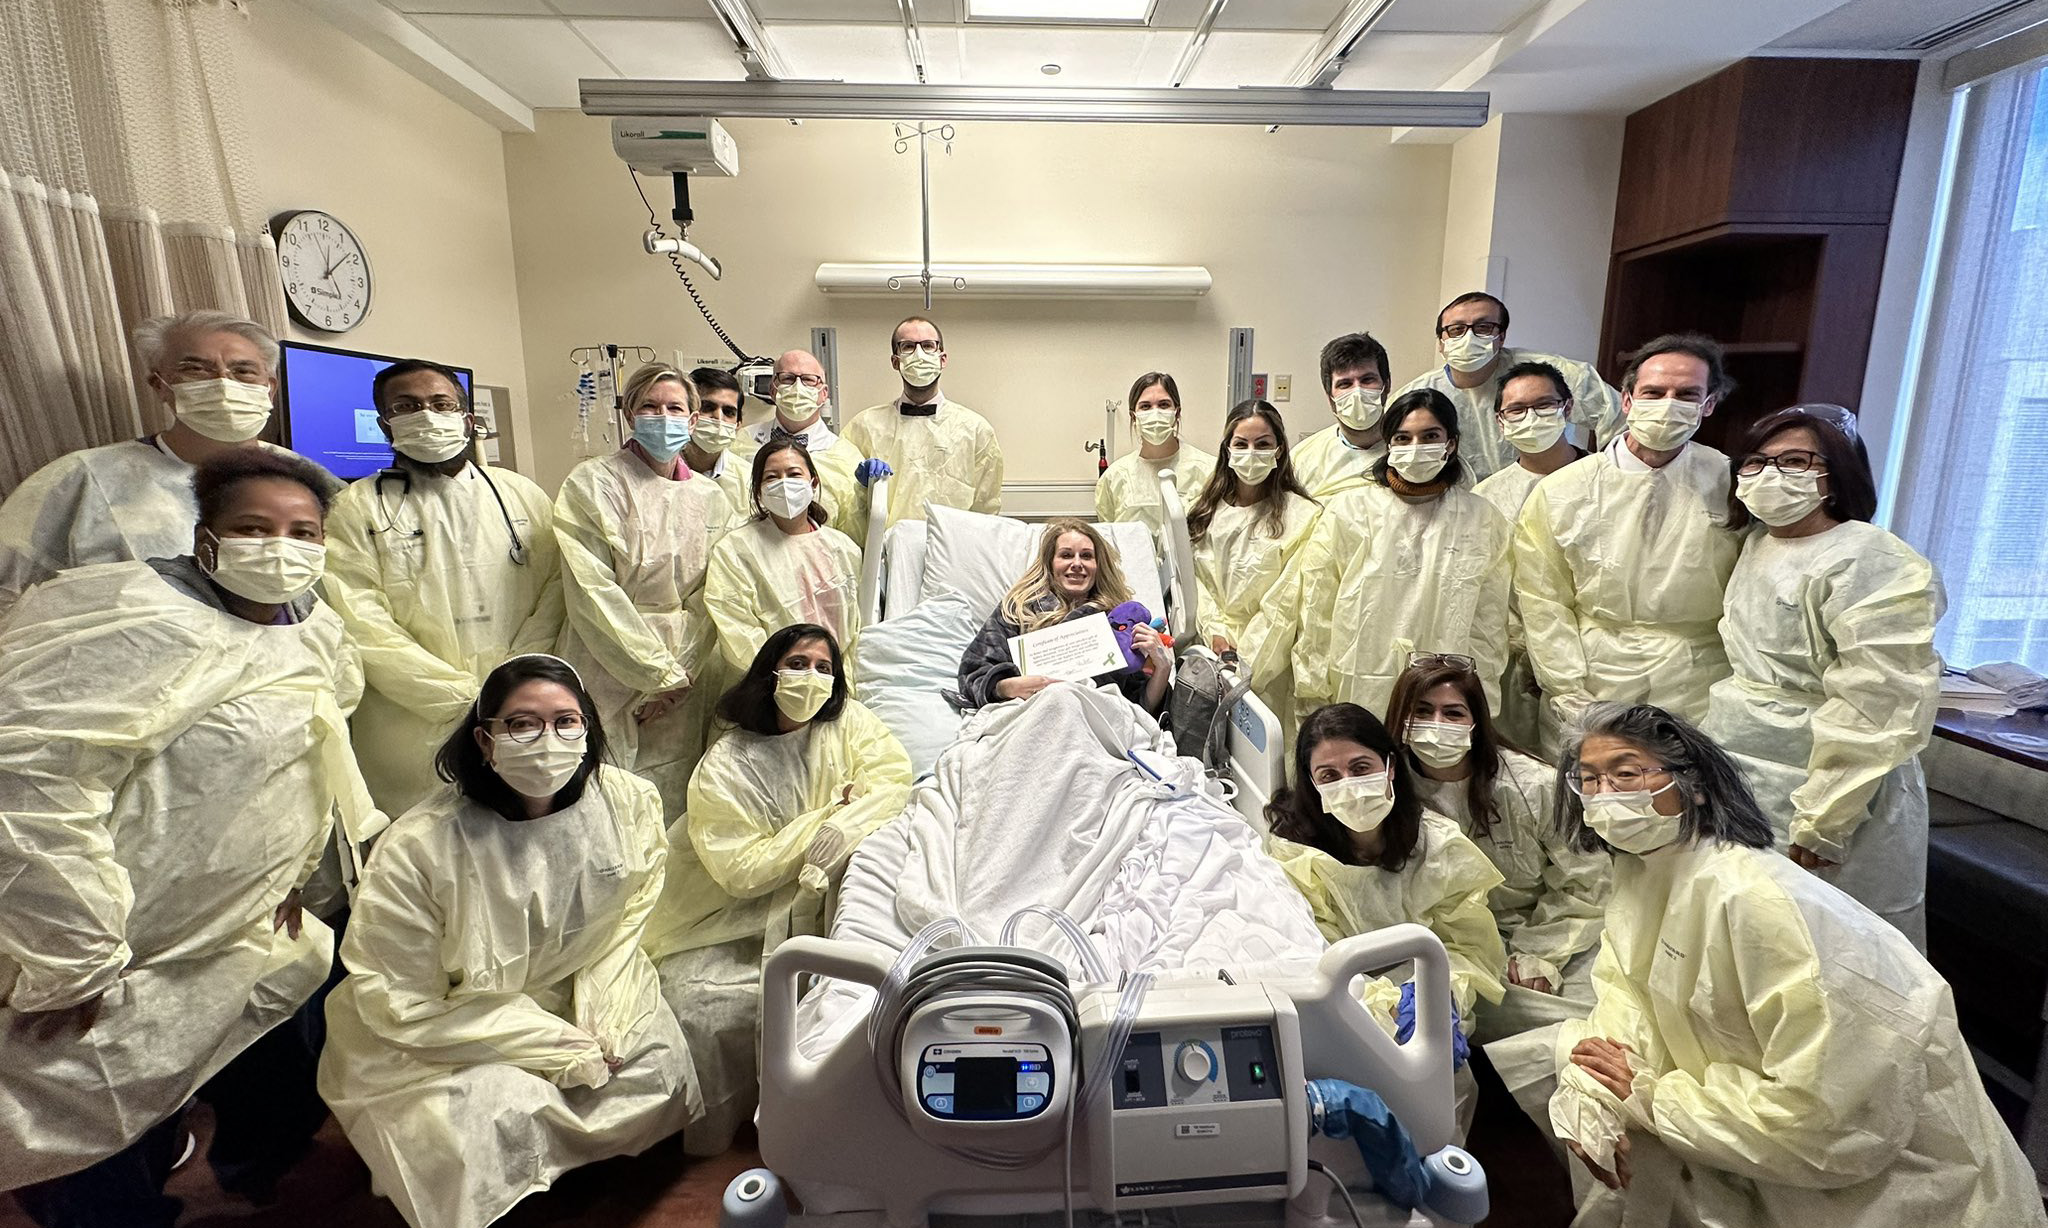 Dr. Gmurczyk after surgery with team